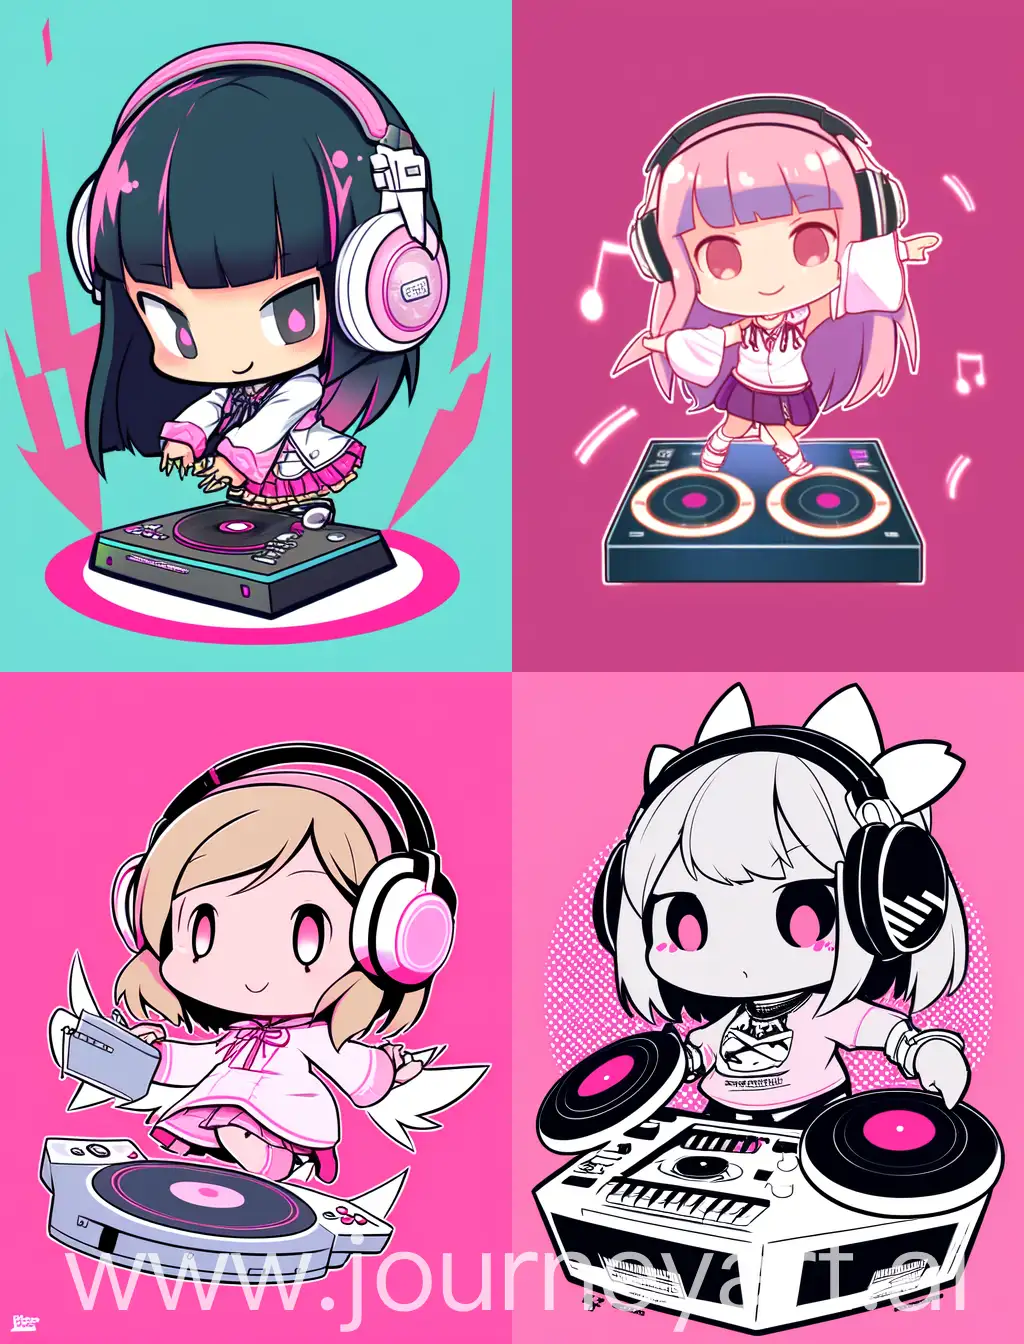 Chibi-Anime-Girl-DJ-Playing-with-Strong-Lines-on-Pink-Background